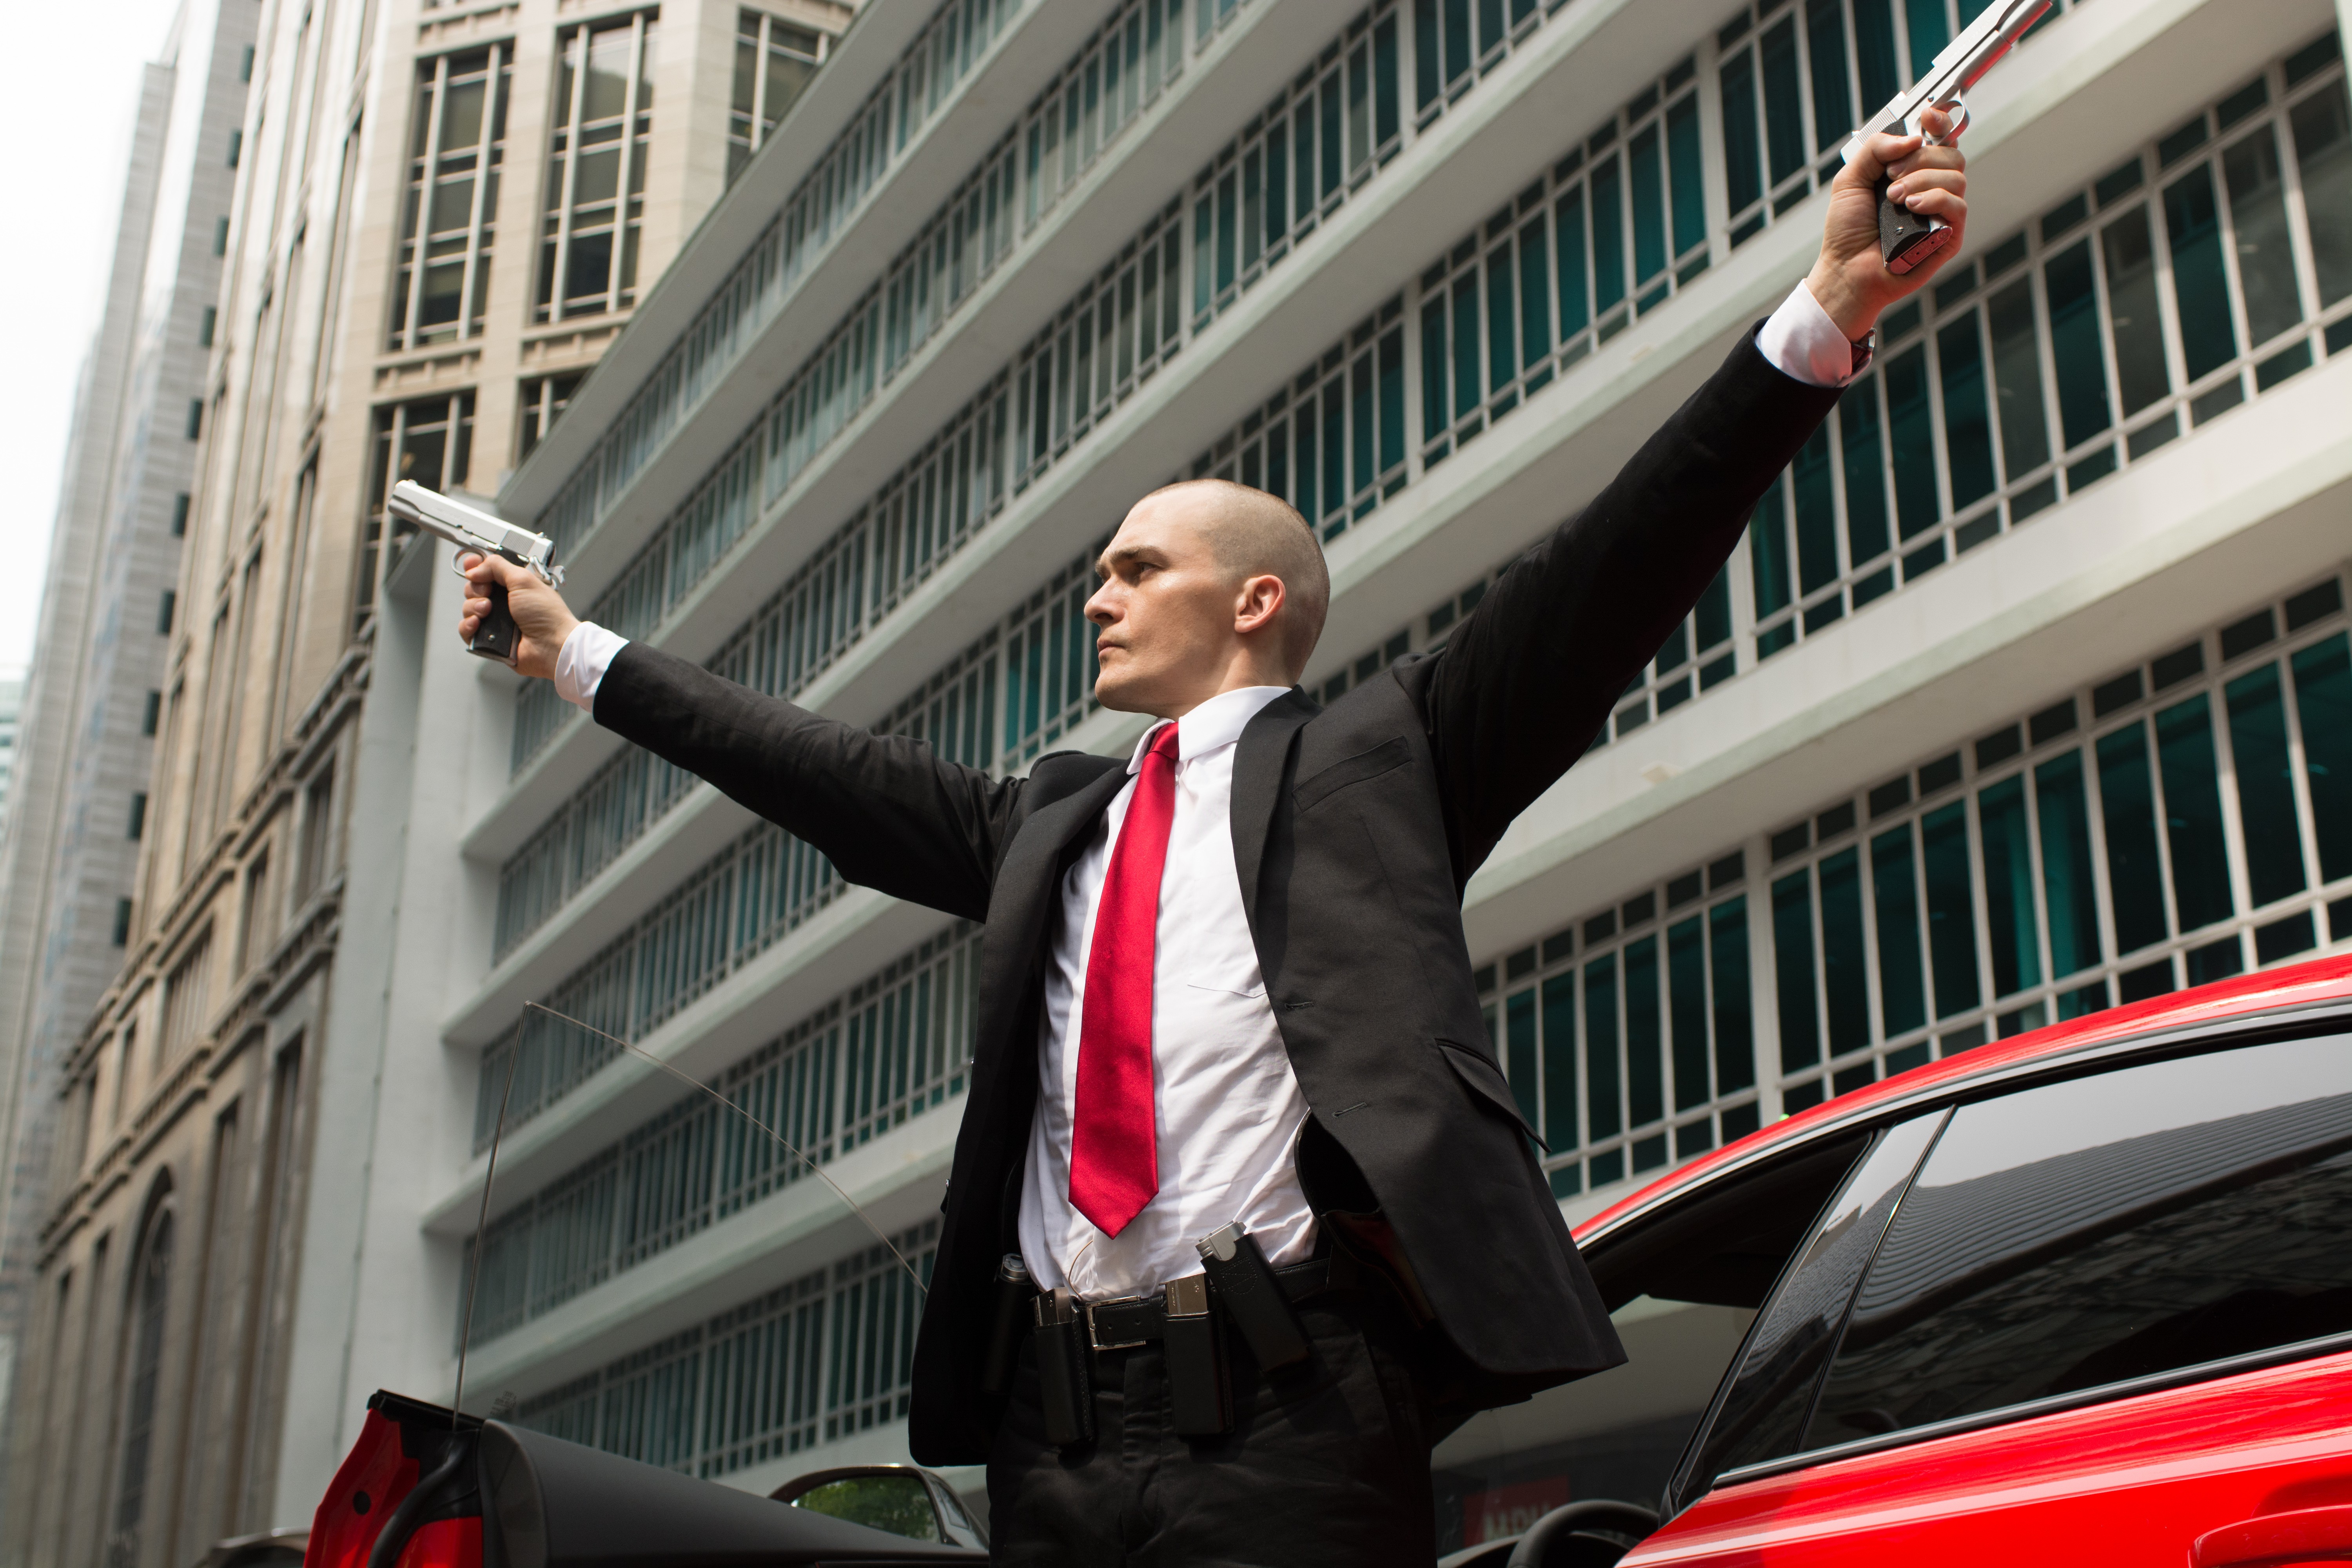 Hitman: Agent 47 Wallpapers, Pictures, Images